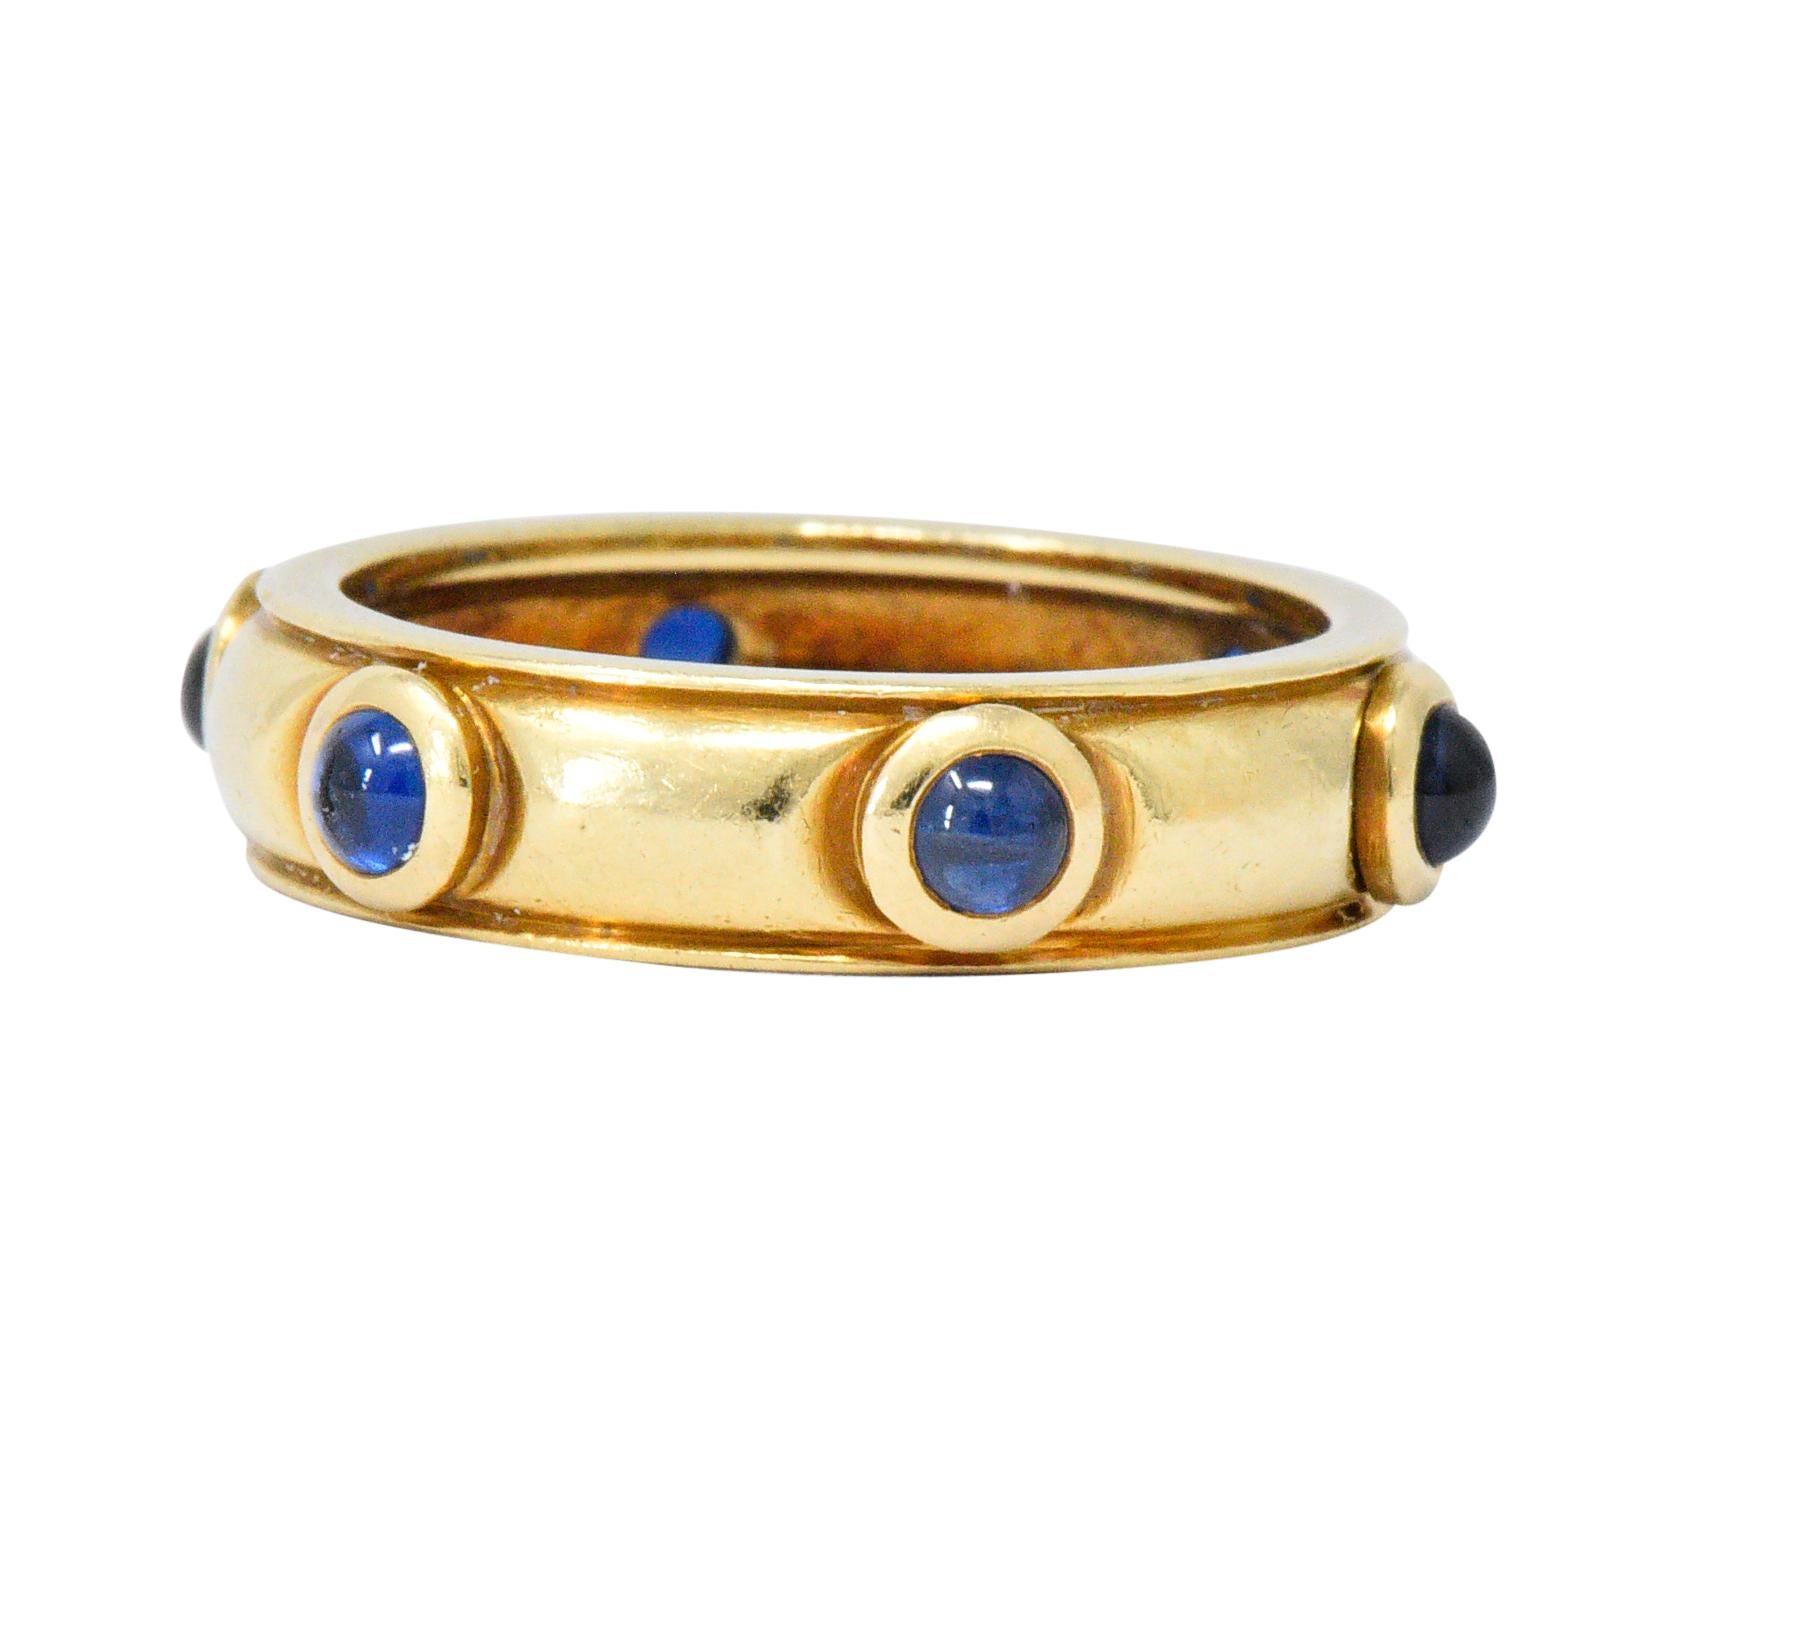 Featuring six round cabochon sapphires, weighing approximately 1.50 carats total, deep royal blue and very well matched

All sapphires are bezel set with domed polished gold between as well as edging detail

Fully signed Tiffany & Co., stamped Italy